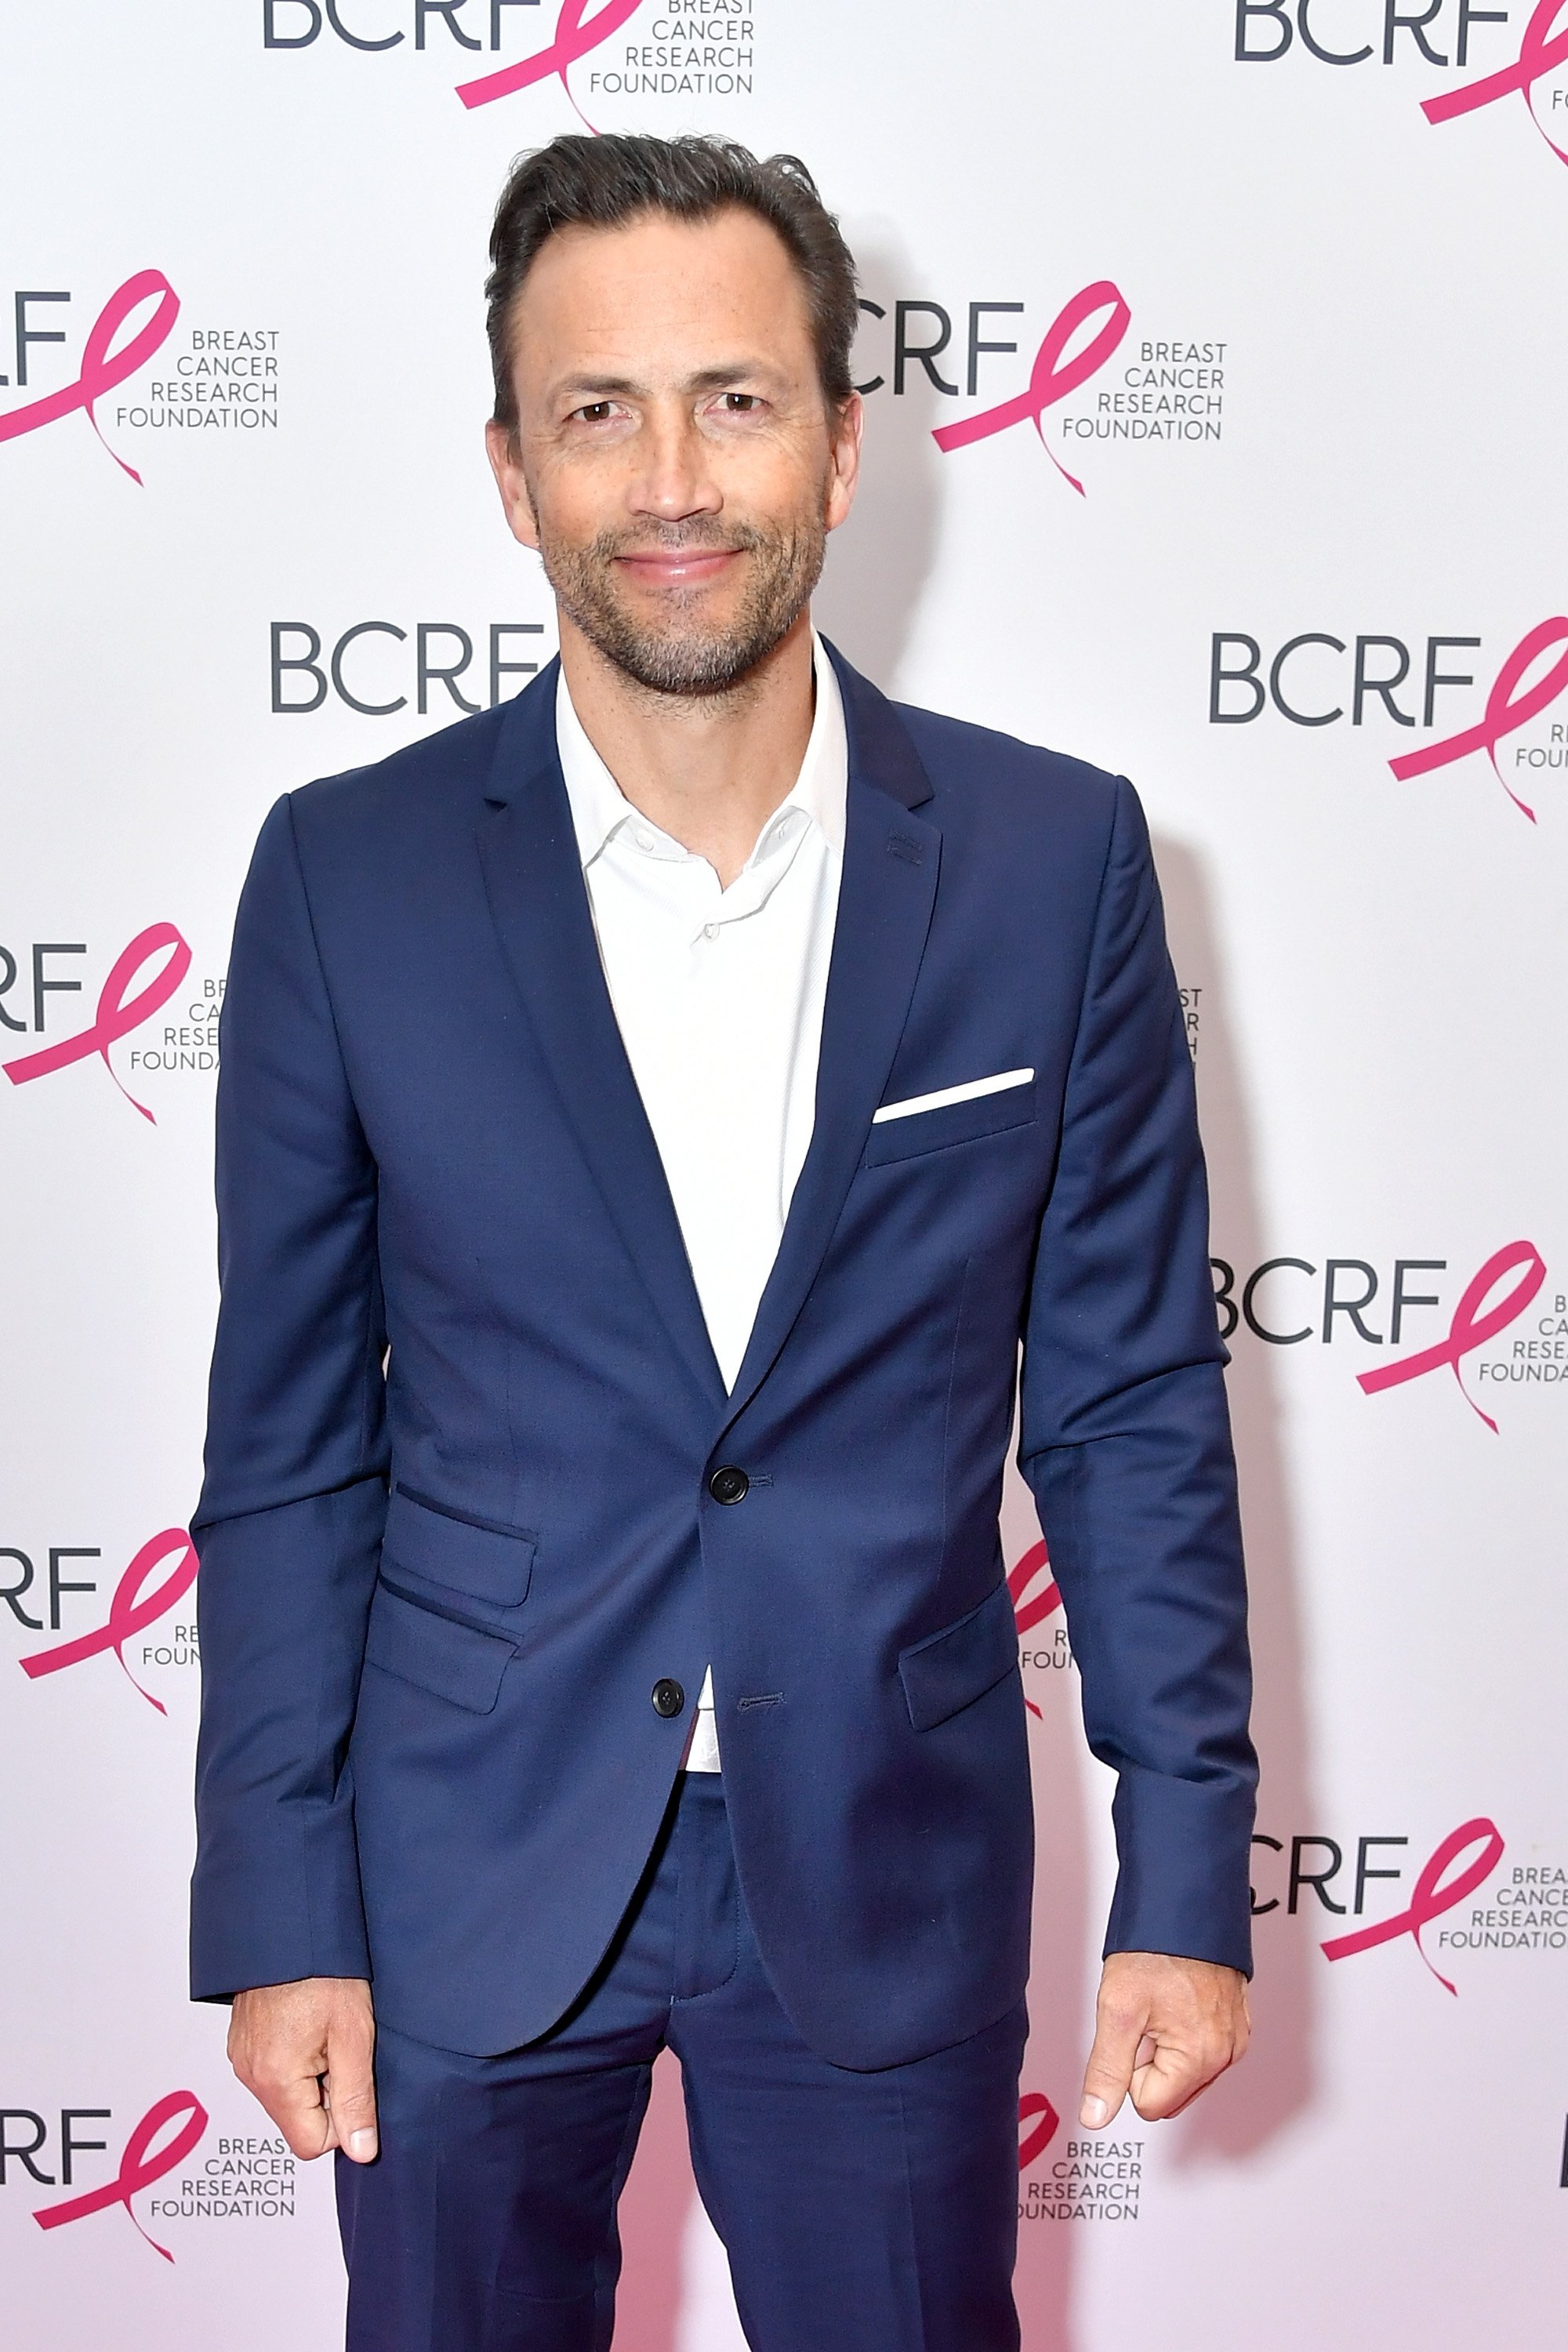 Andrew Shue attends the Breast Cancer Research Foundation (BCRF) New York Symposium & Awards Luncheon at New York Hilton Midtown at New York Hilton Midtown on October 25, 2018, in New York City. | Source: Getty Images.